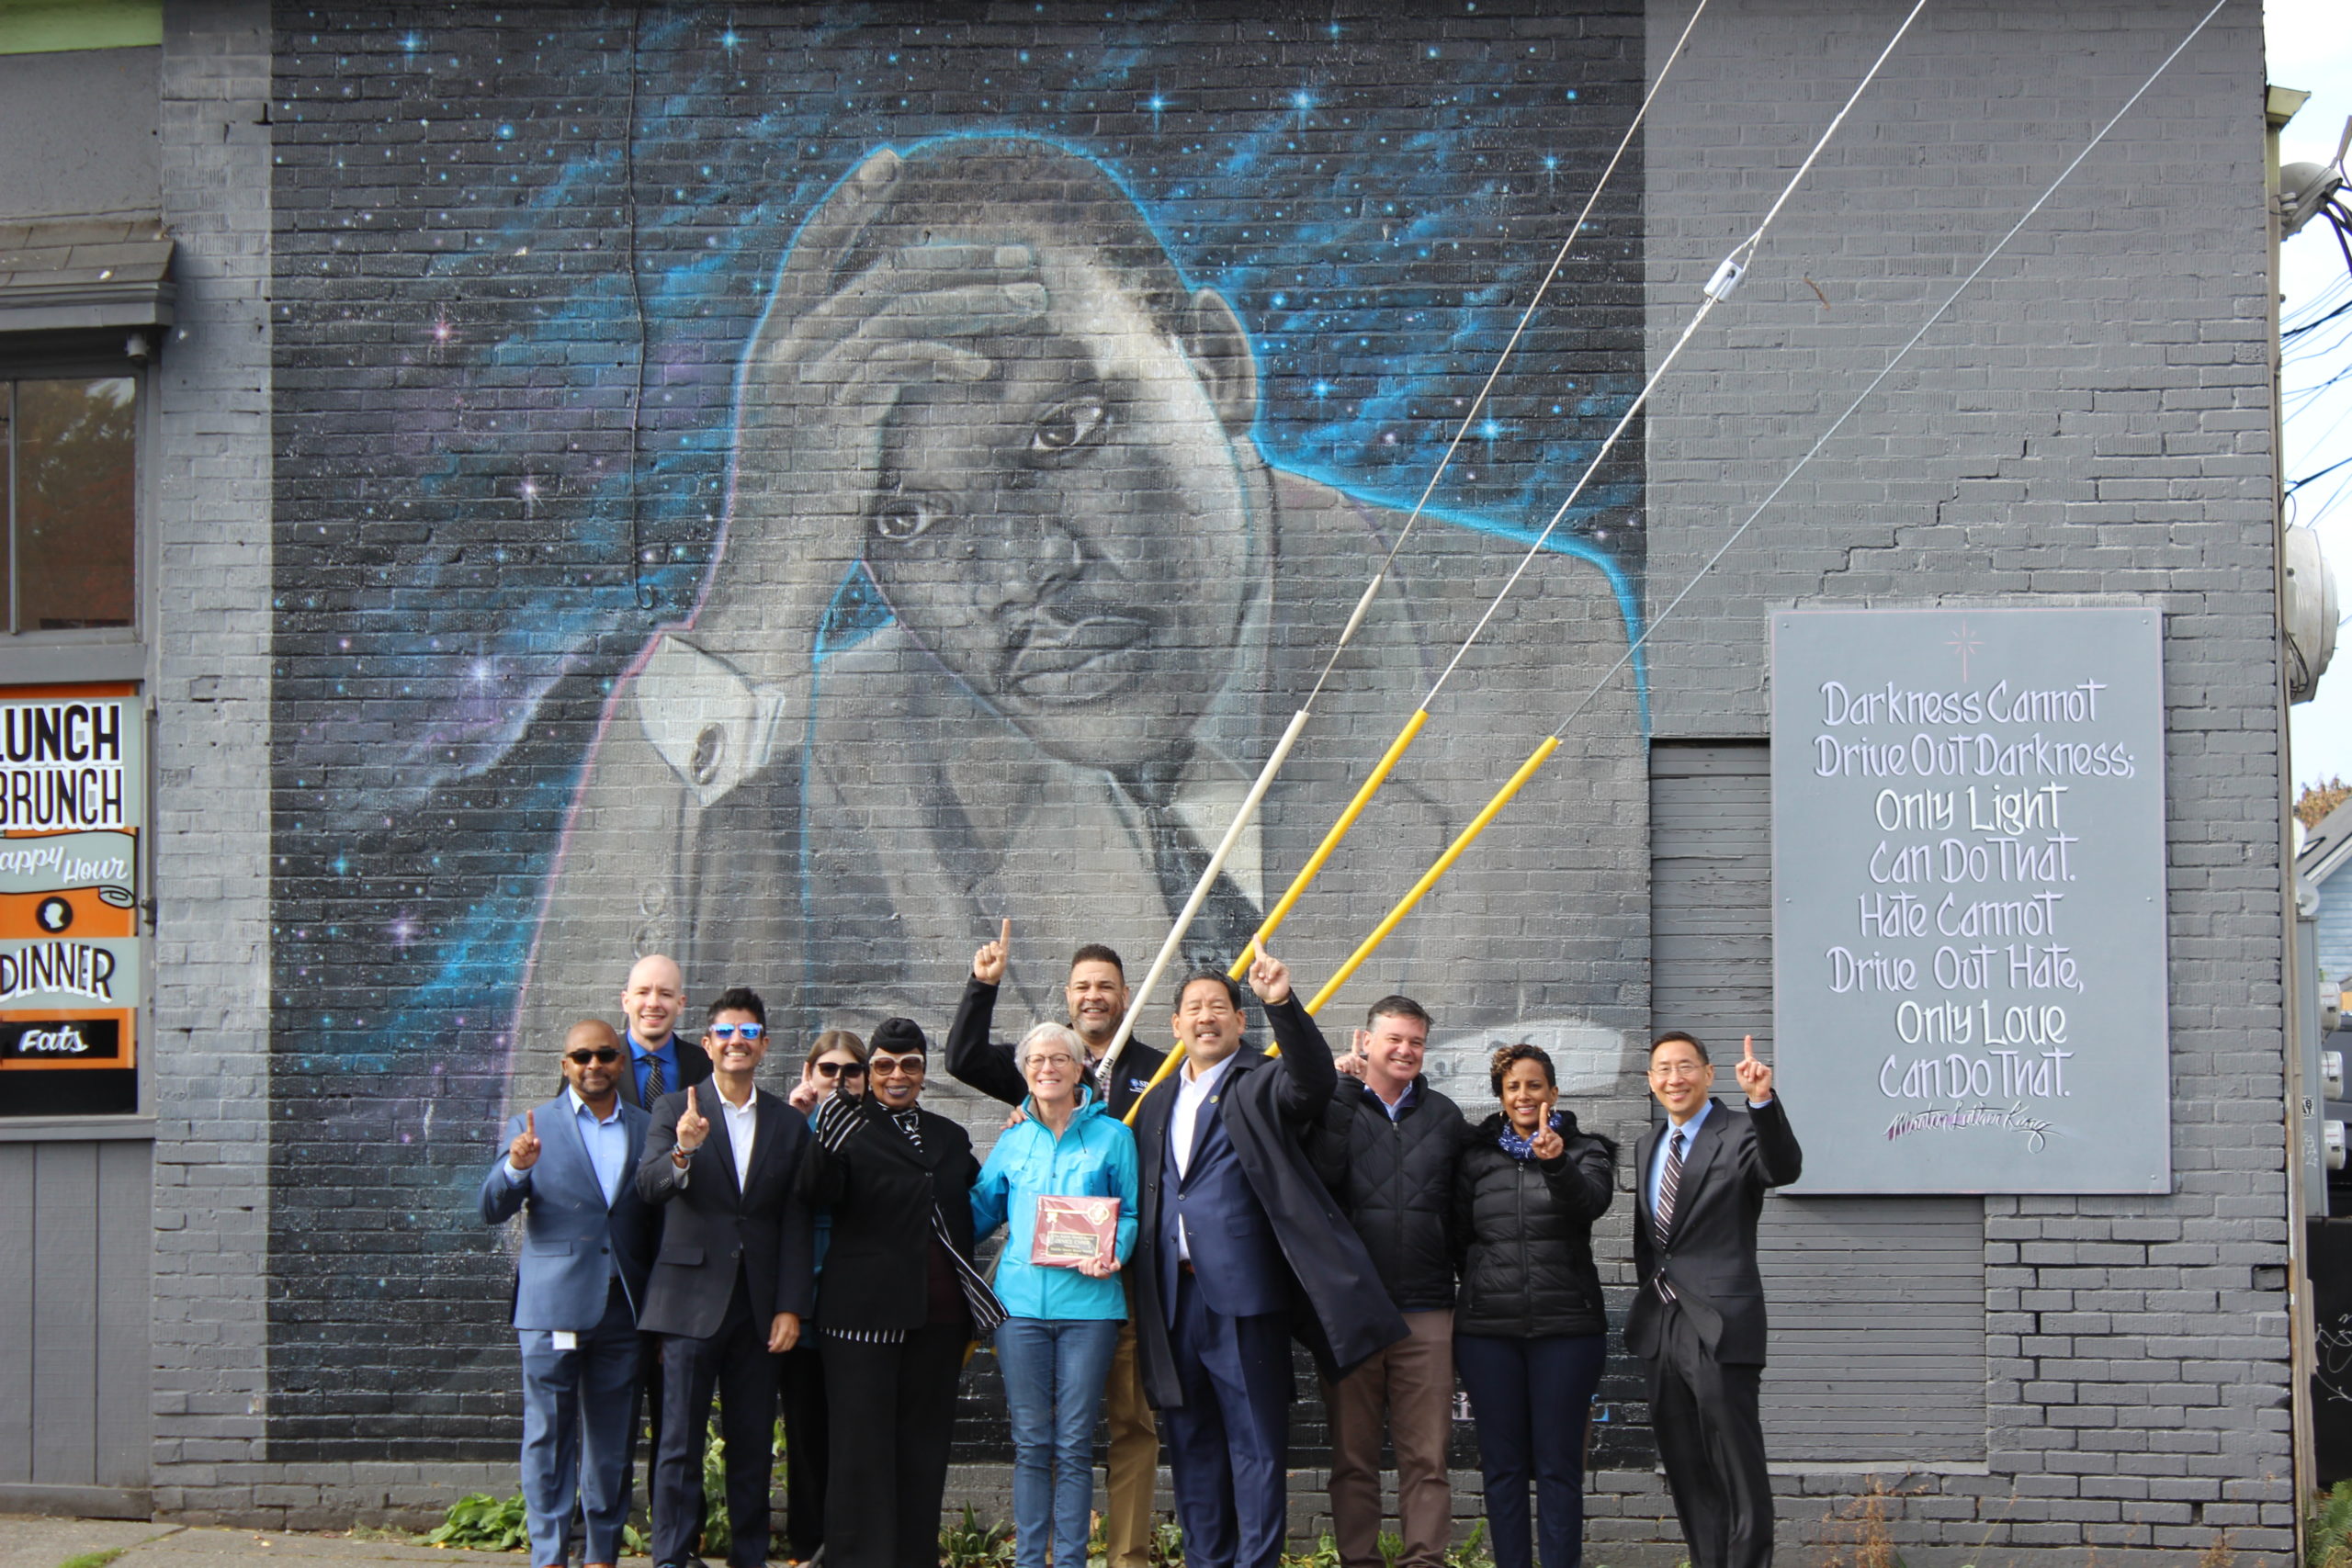 Mayor Harrell and team pose in front of MLK Jr. mural and hold up index finger for "One Seattle"